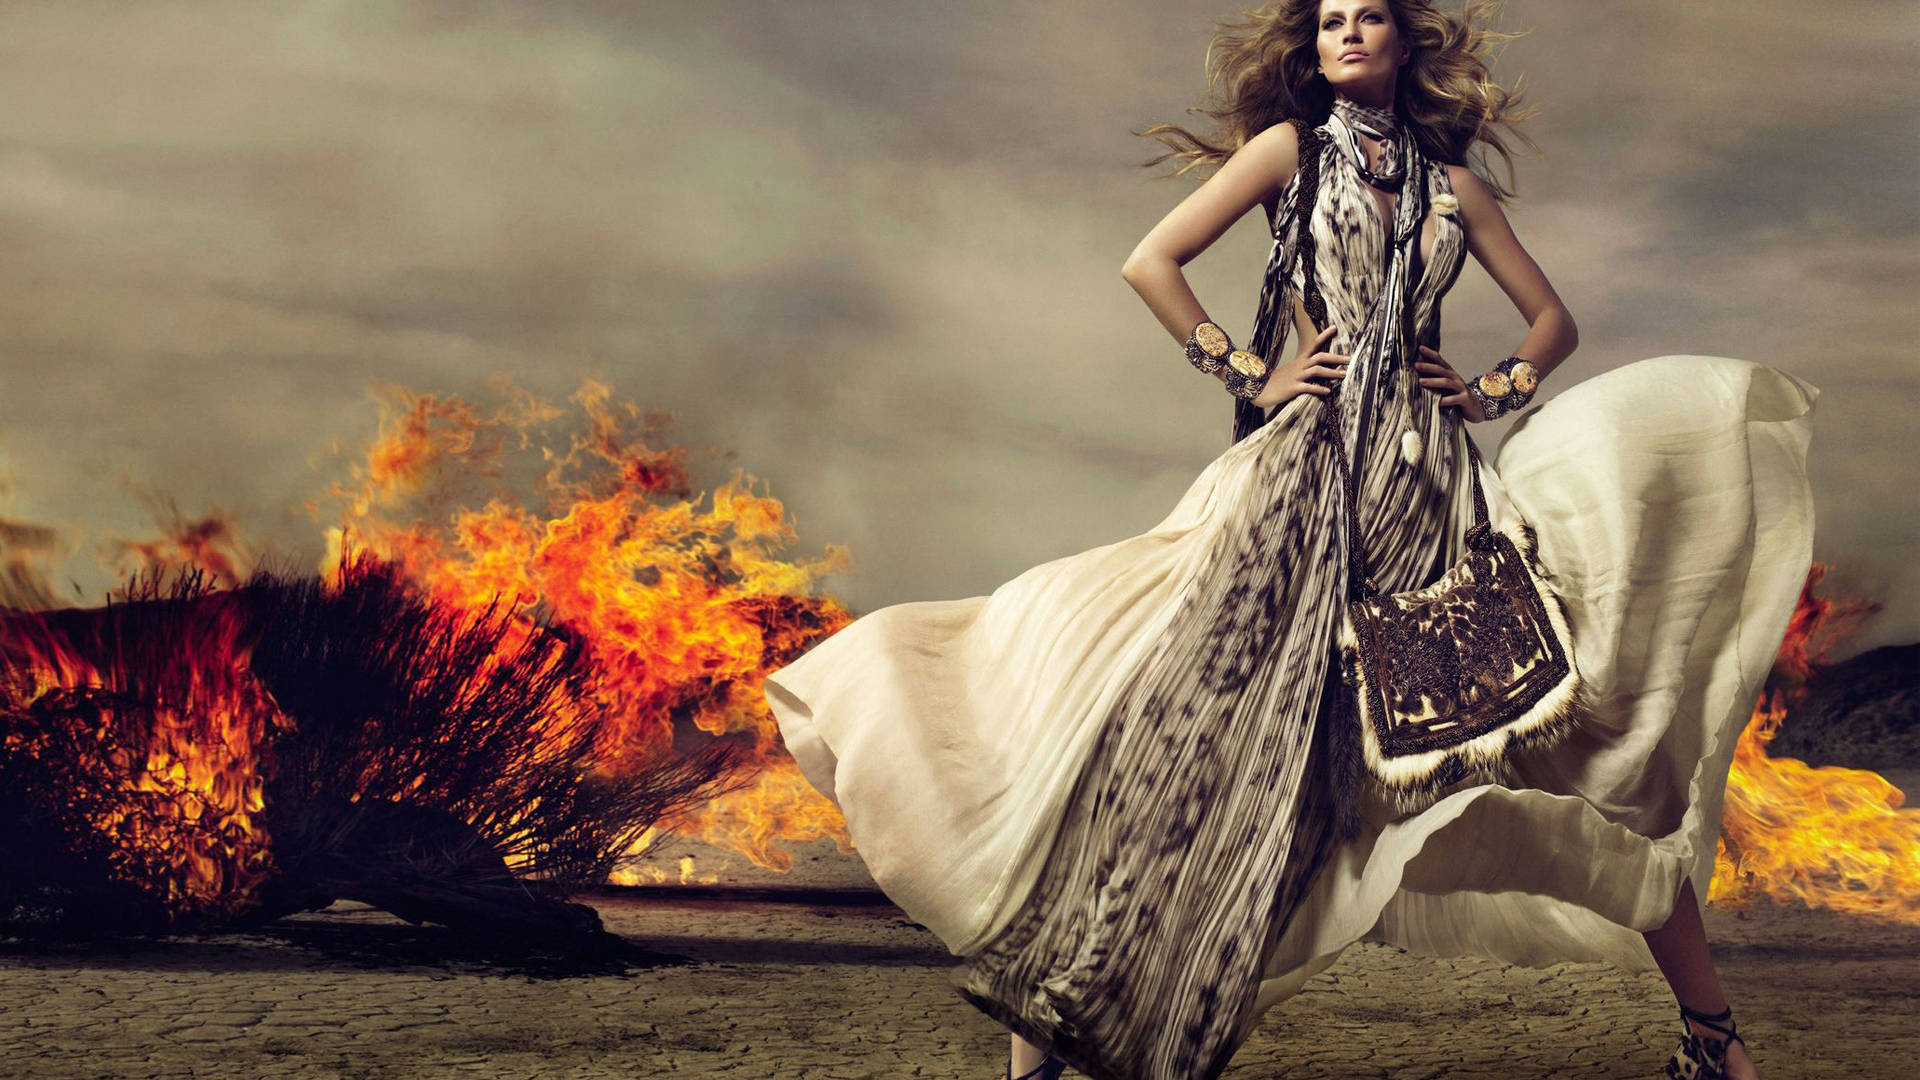 Fashion Girl On Fire Background